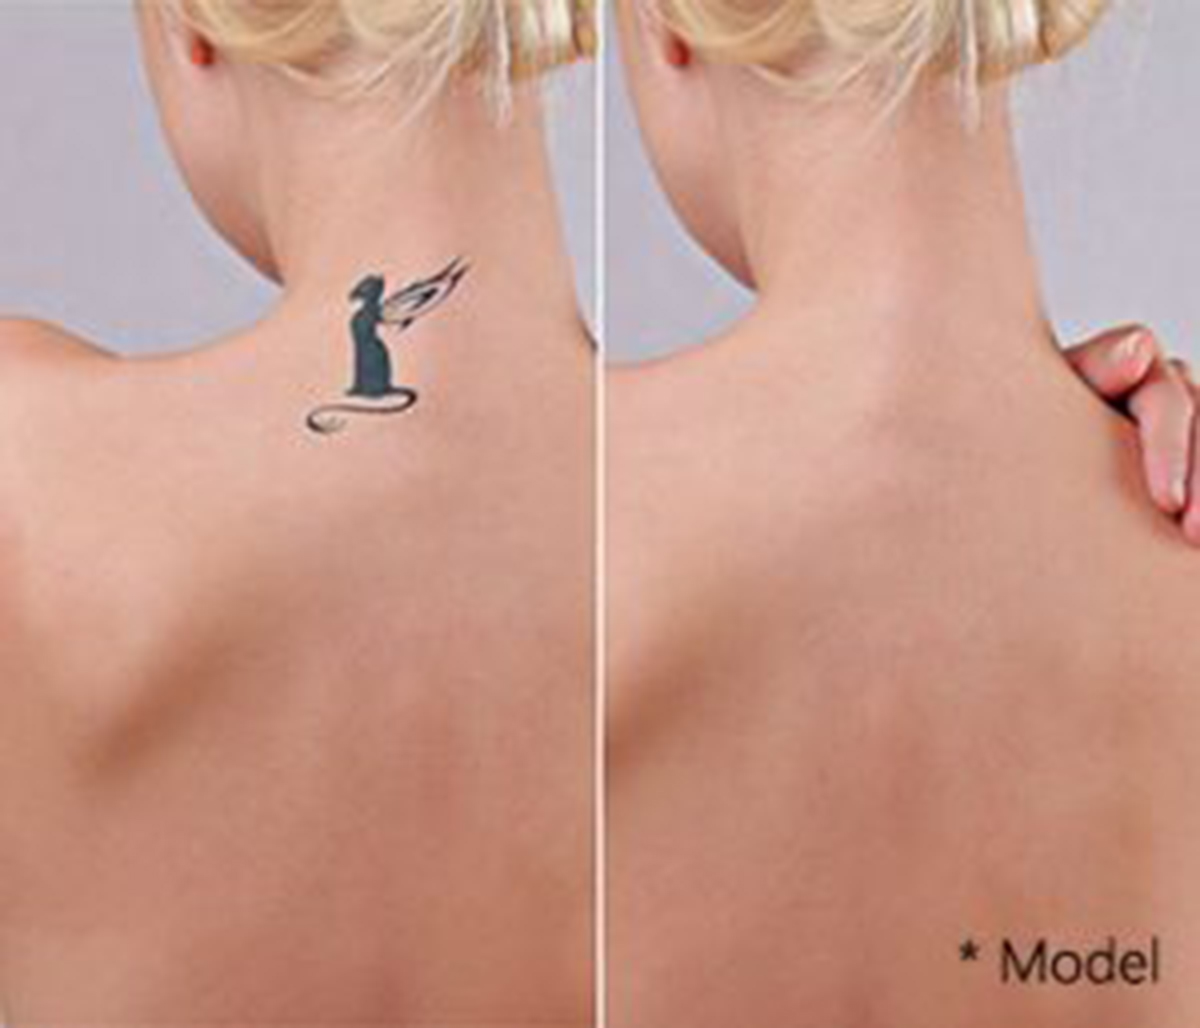 Beverly Hills area plastic surgeon offers effective laser tattoo removal